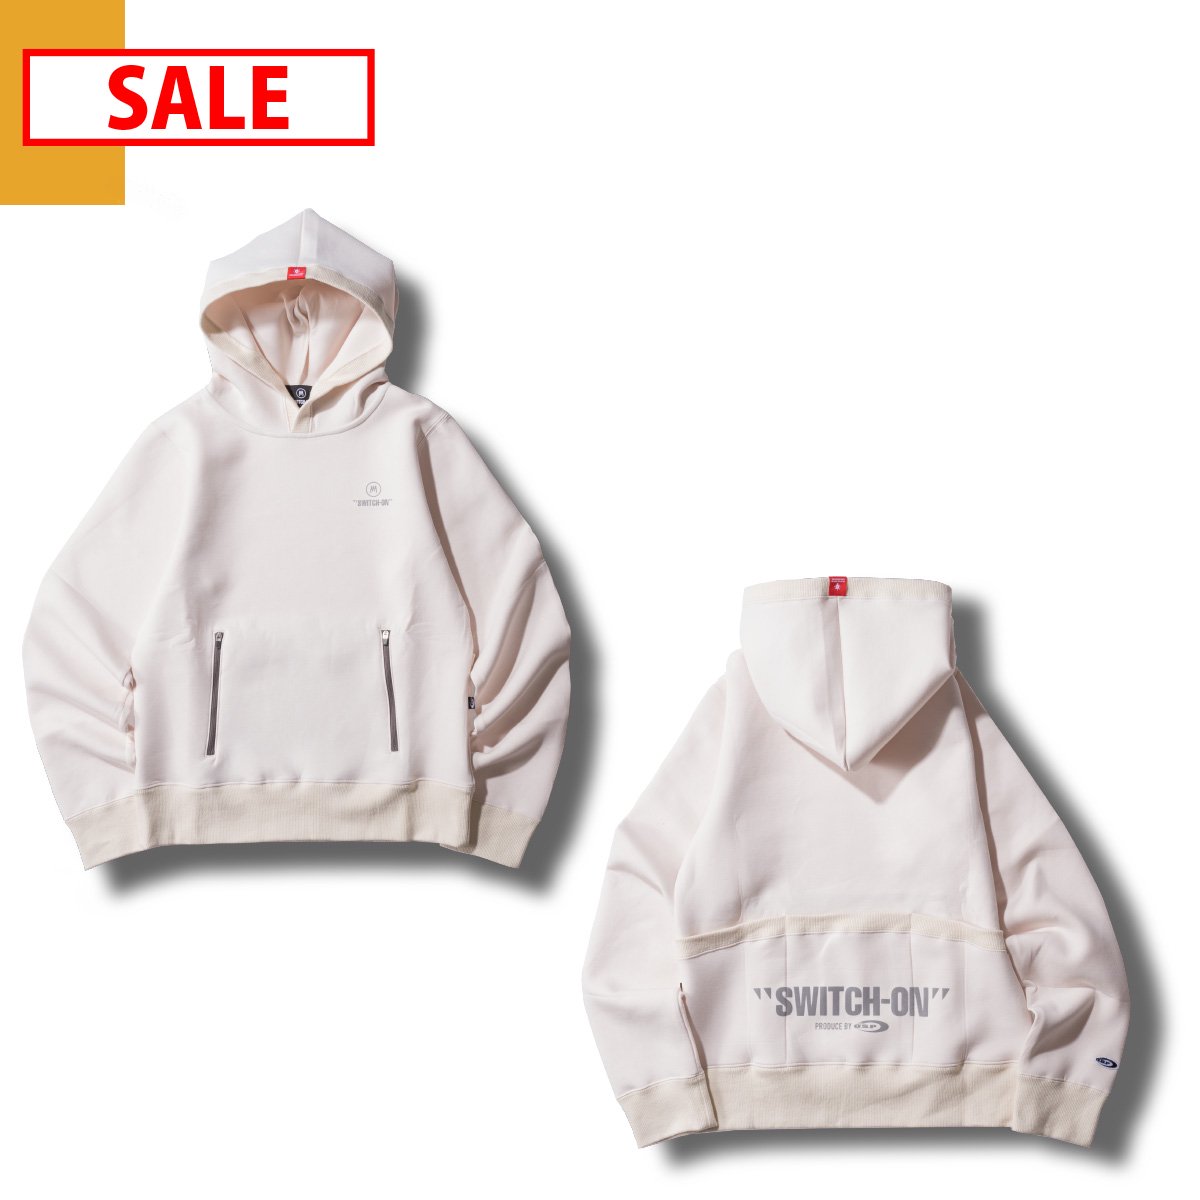 <img class='new_mark_img1' src='https://img.shop-pro.jp/img/new/icons20.gif' style='border:none;display:inline;margin:0px;padding:0px;width:auto;' />EZ stretch hoodie